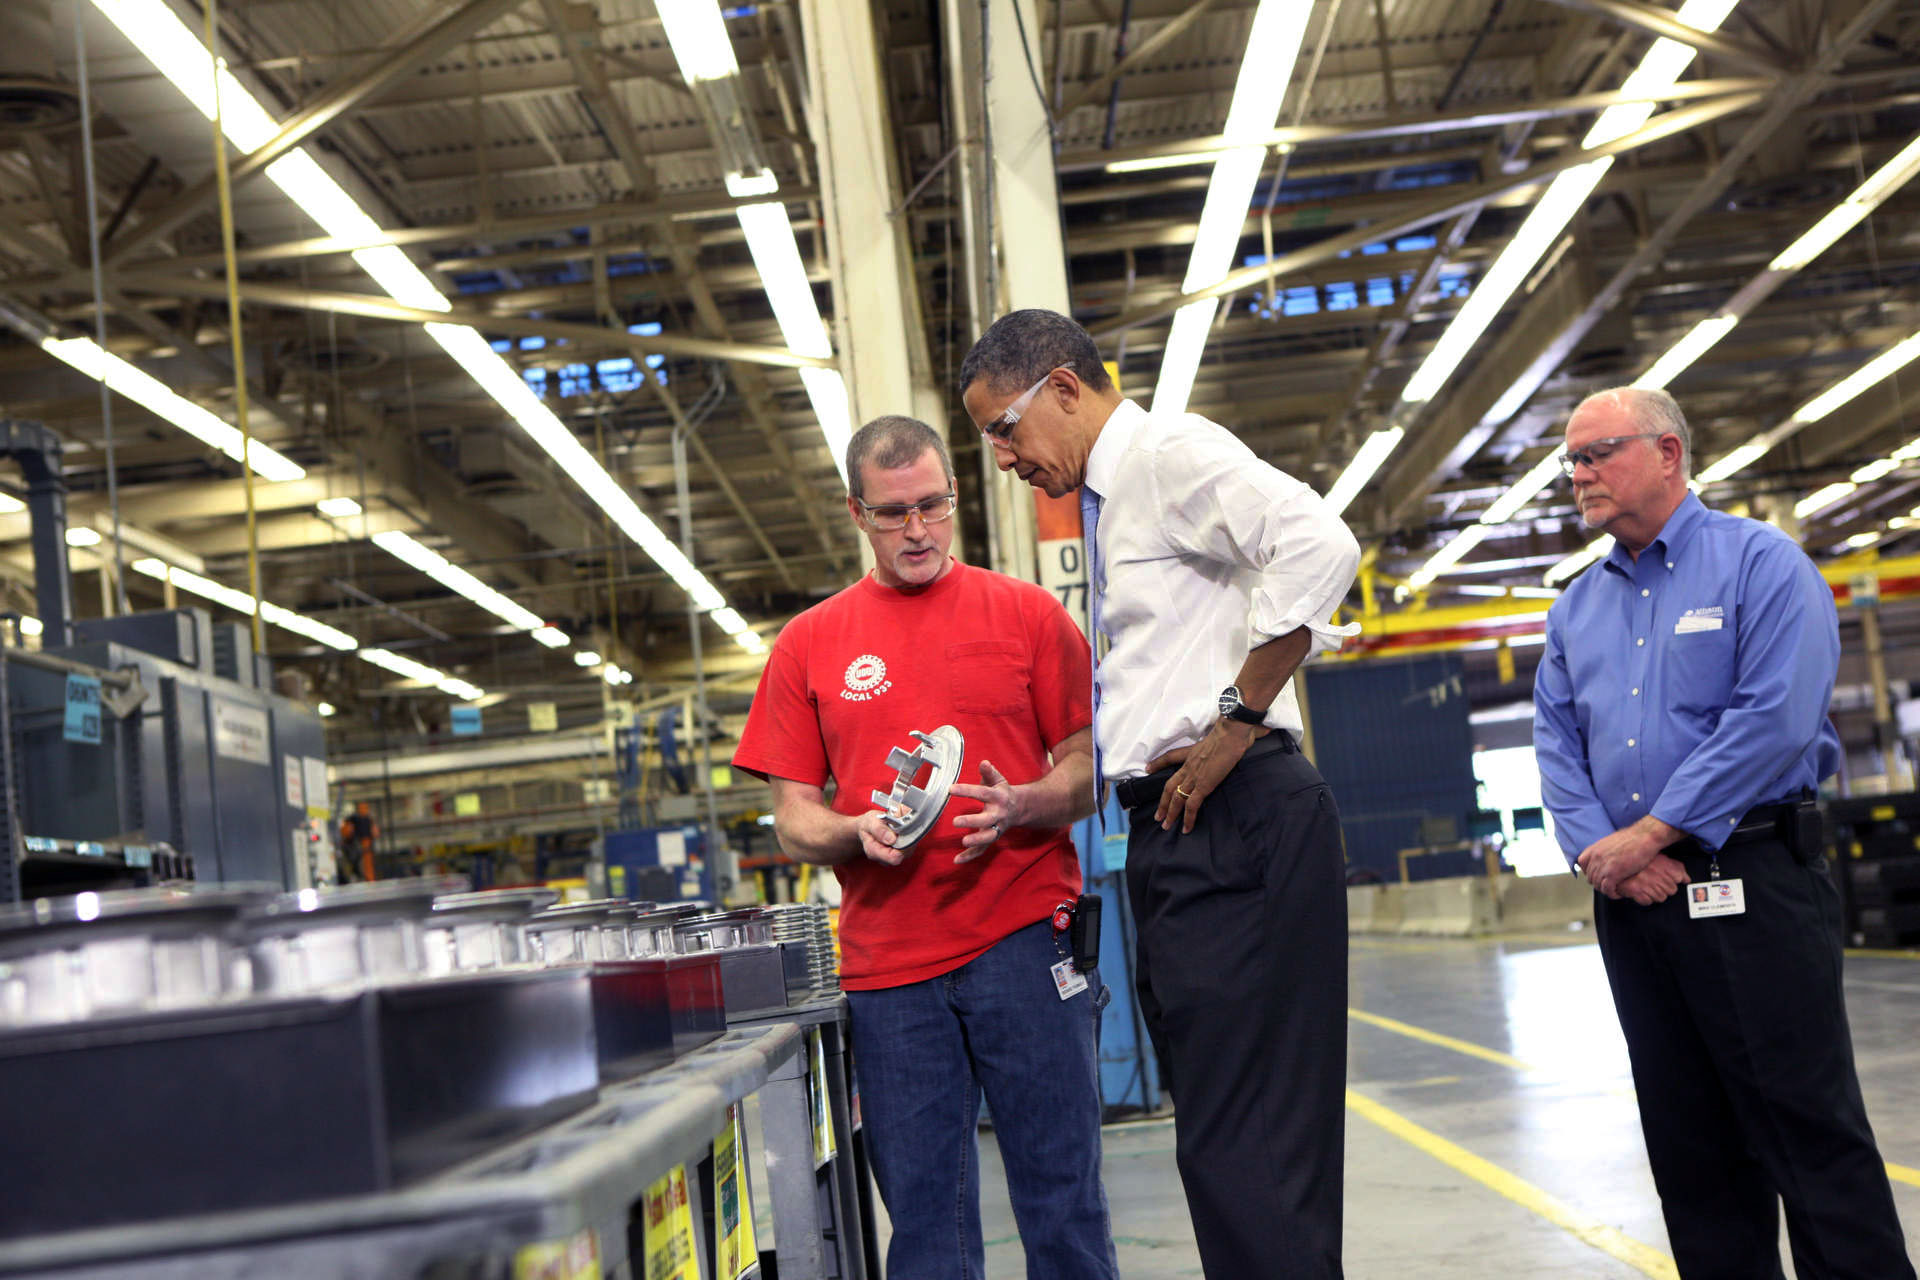 President Barack Obama Examines a Part During a Tour of Allison Transmission in Indianapolis, Indiana